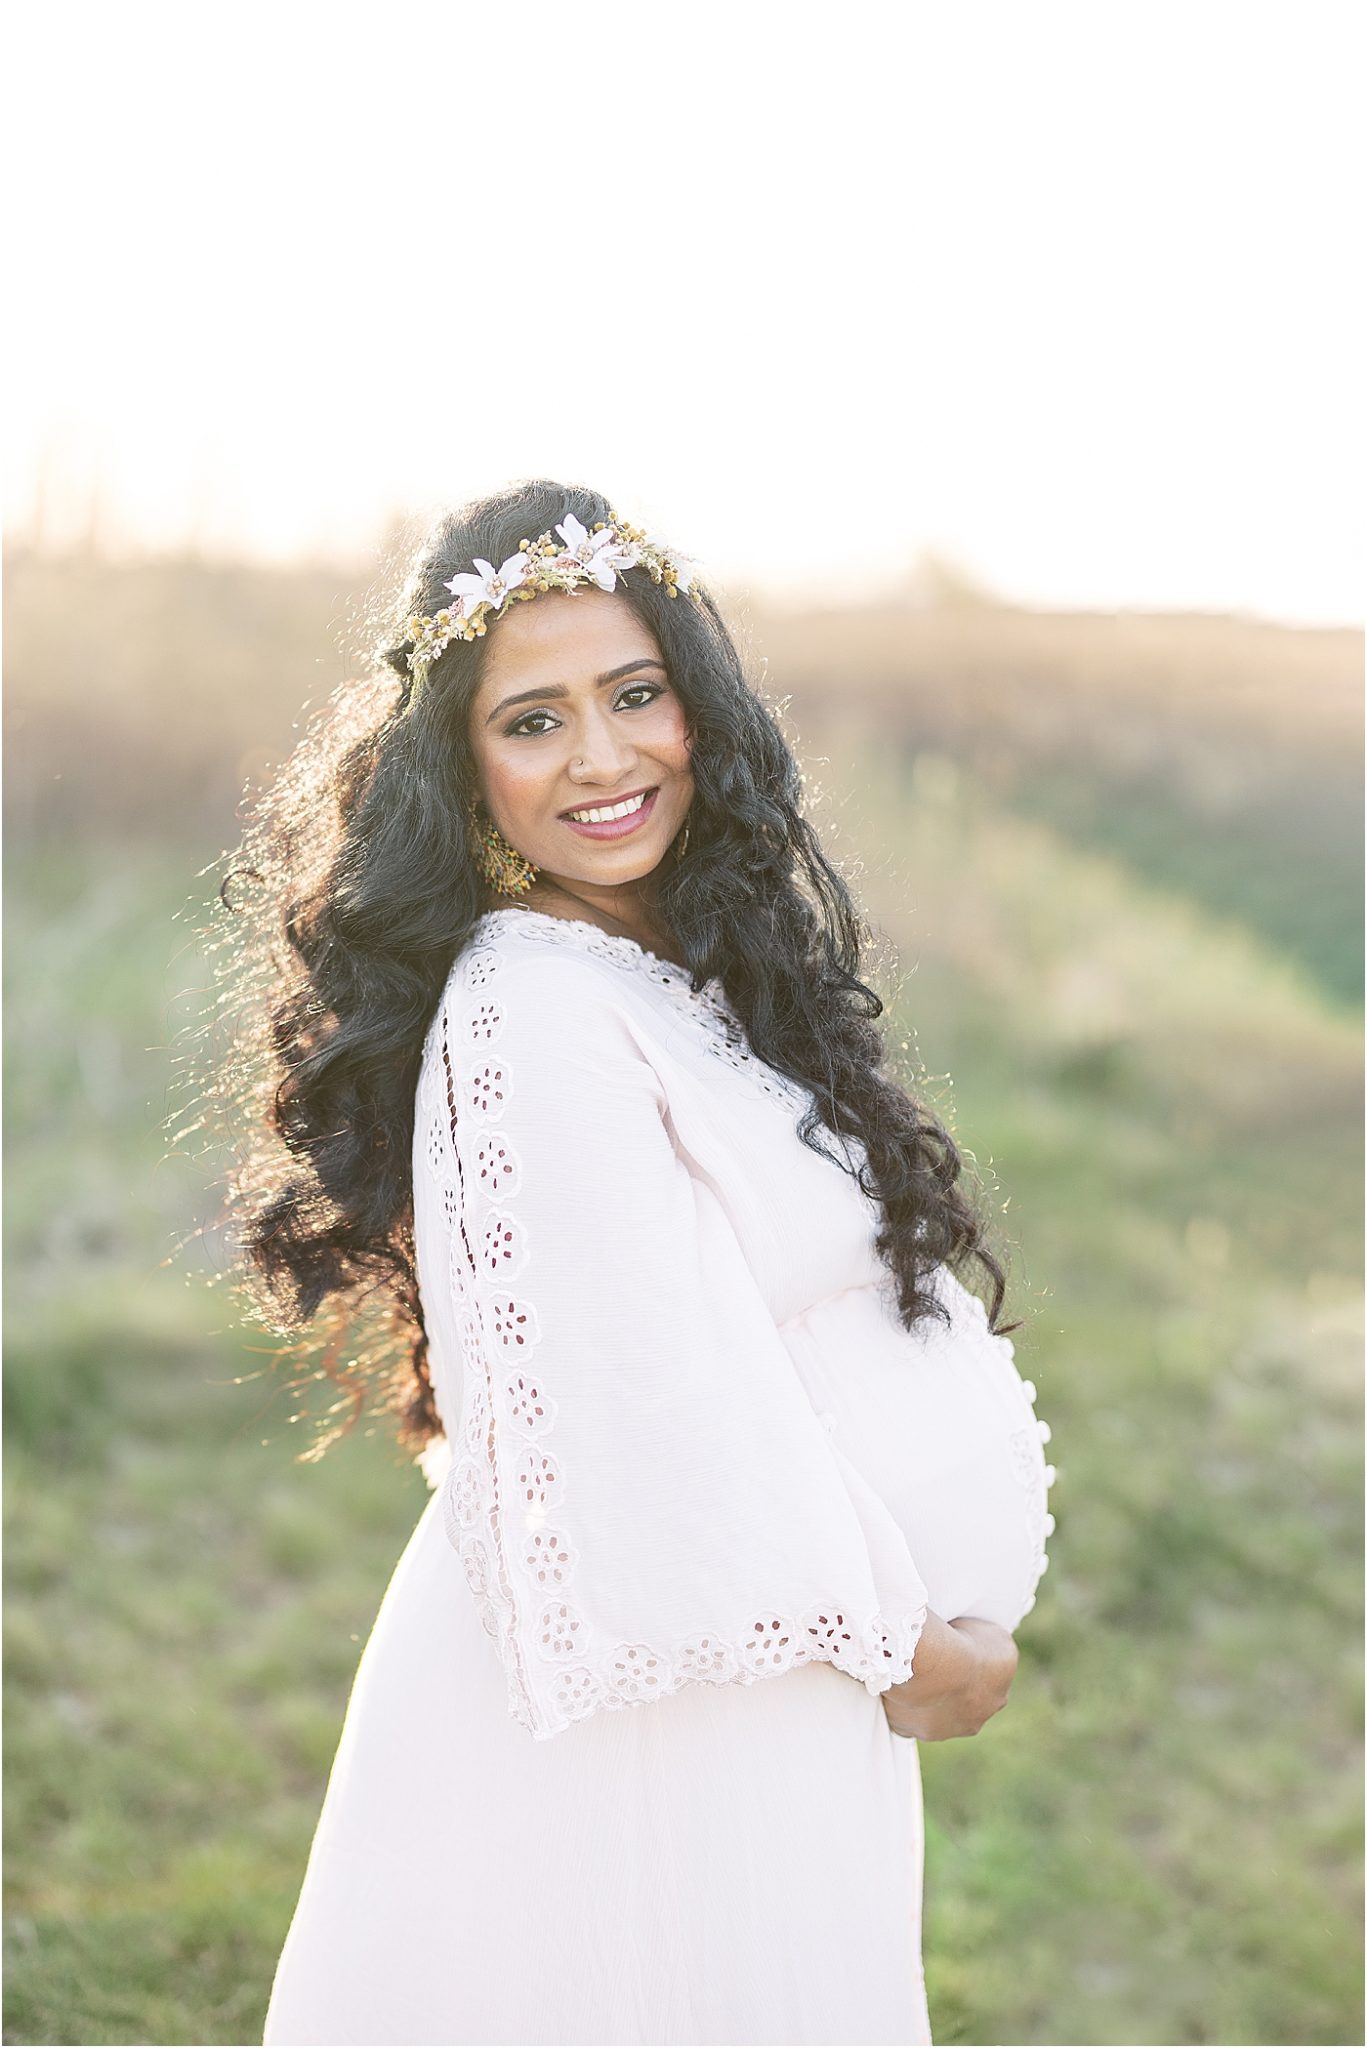 Sunset maternity session in field in Fishers. Photo by Lindsay Konopa Photography.